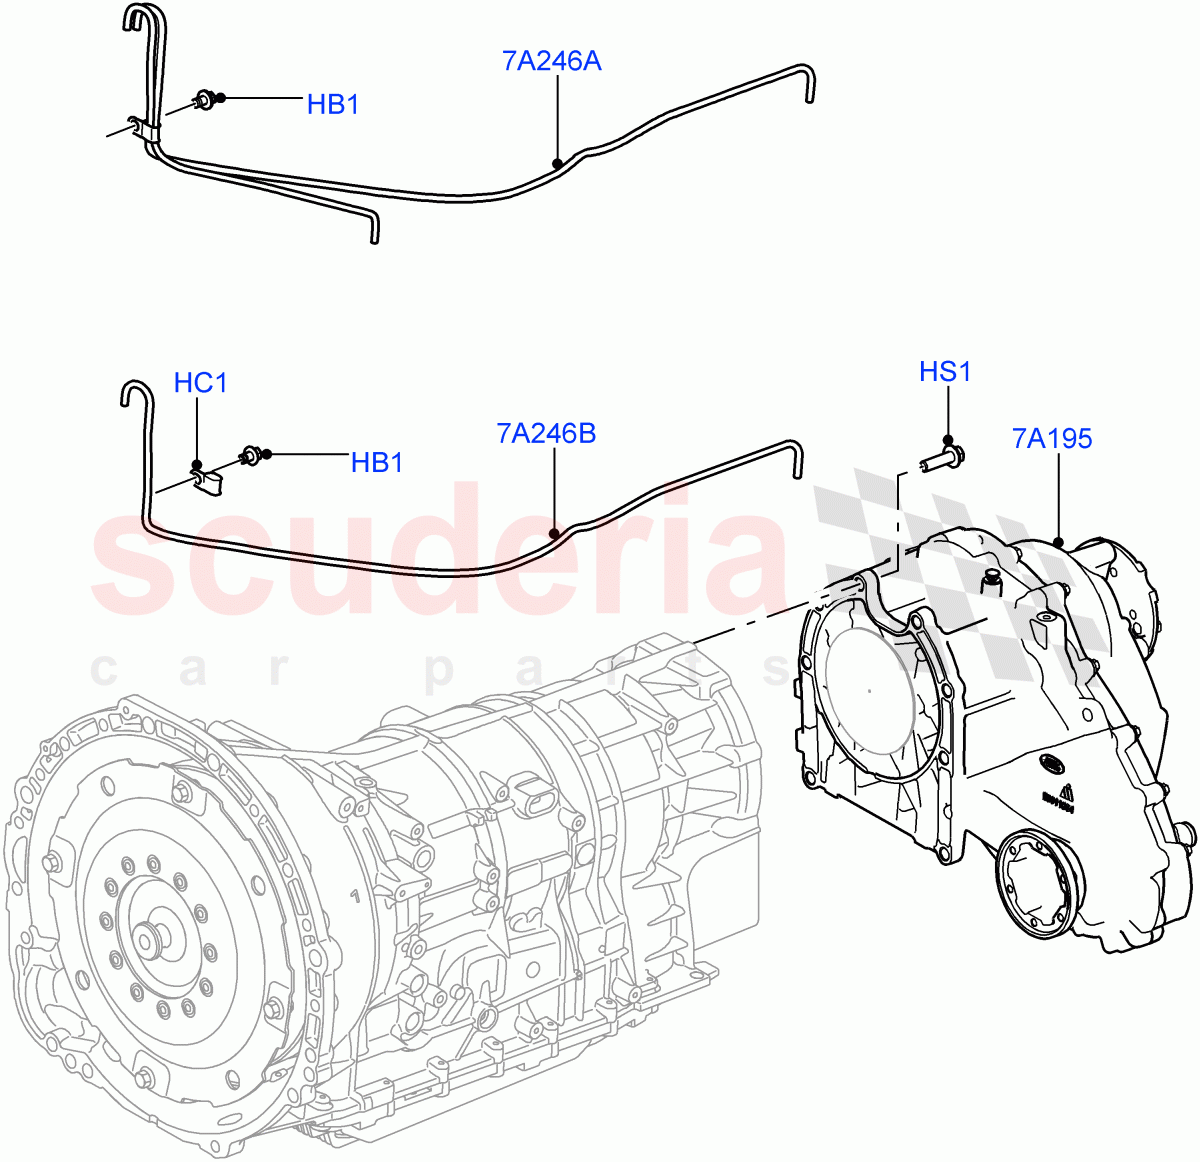 Transfer Drive Case(8 Speed Auto Trans ZF 8HP70 4WD,With 1 Speed Transfer Case,8 Speed Auto Trans ZF 8HP45)((V)FROMEA000001,(V)TOGA999999) of Land Rover Land Rover Range Rover (2012-2021) [3.0 DOHC GDI SC V6 Petrol]